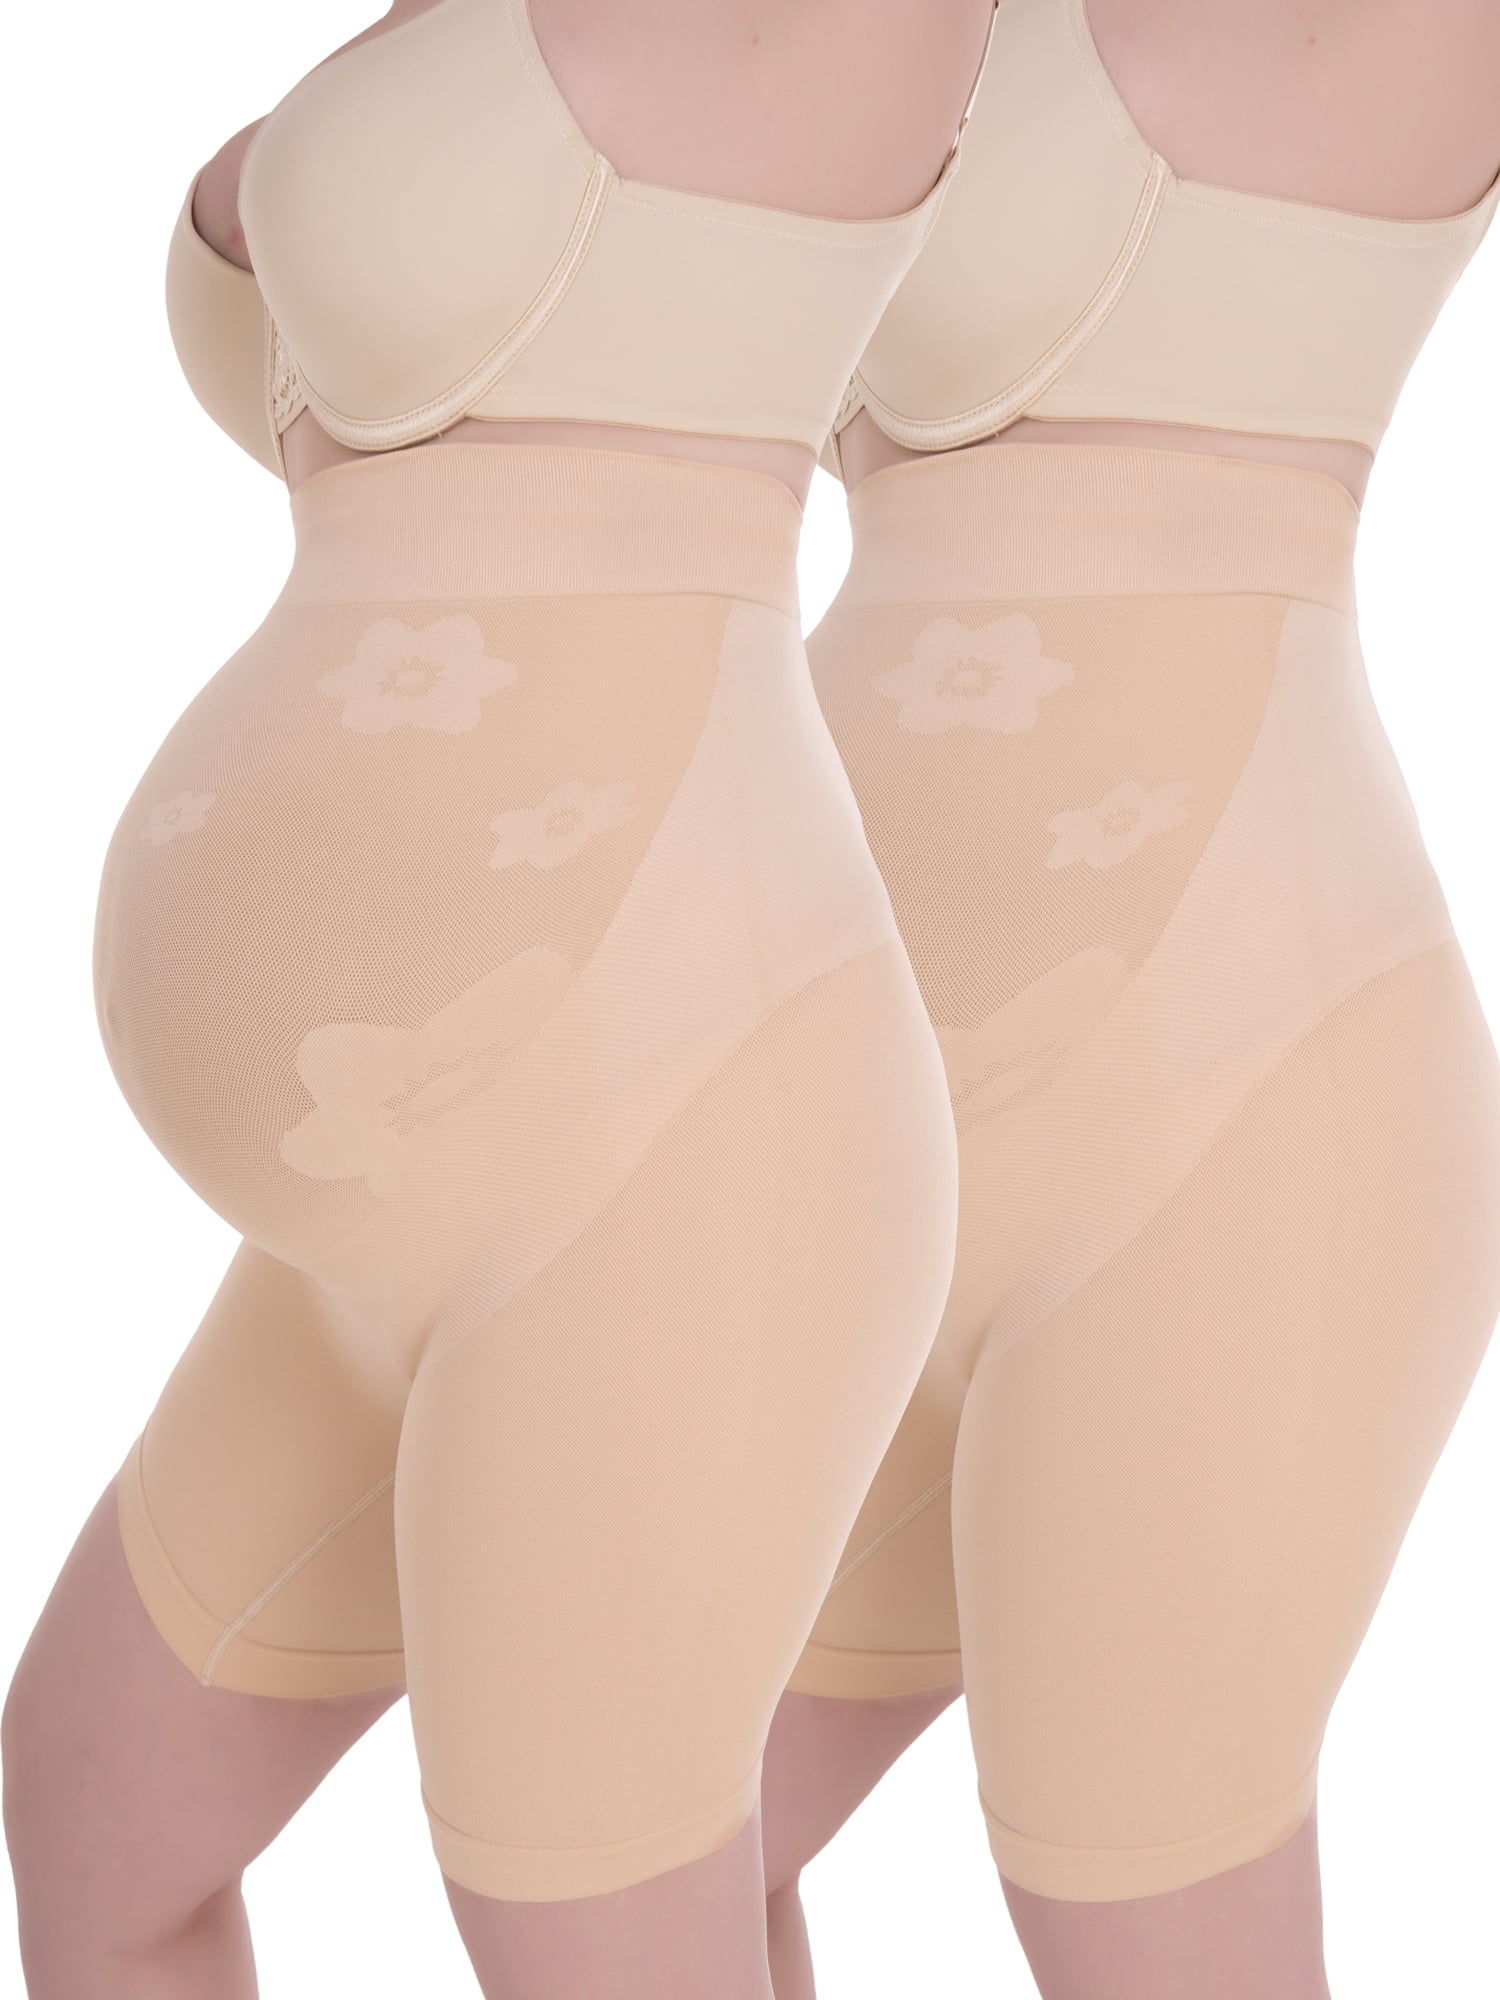 2pcs/Pack Maternity Underwear High Waist Belly Support Comfortable Stretchy  Skin-Friendly